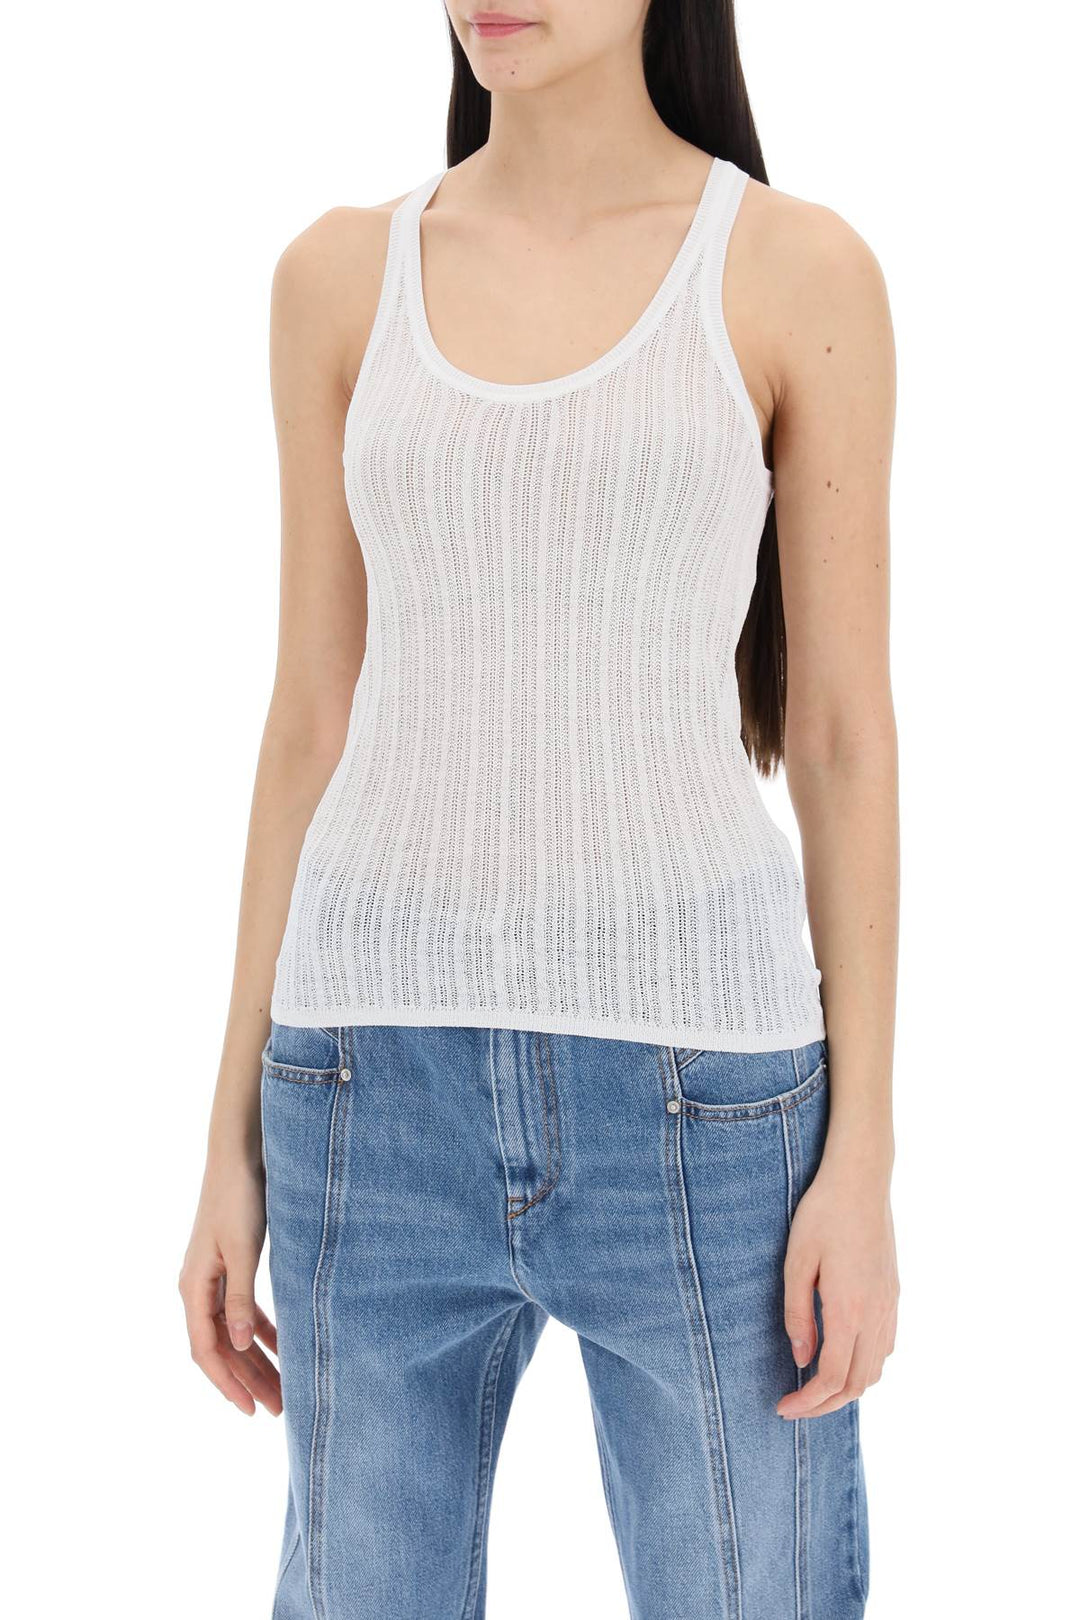 Isabel Marant Perforated Knit Top   Bianco